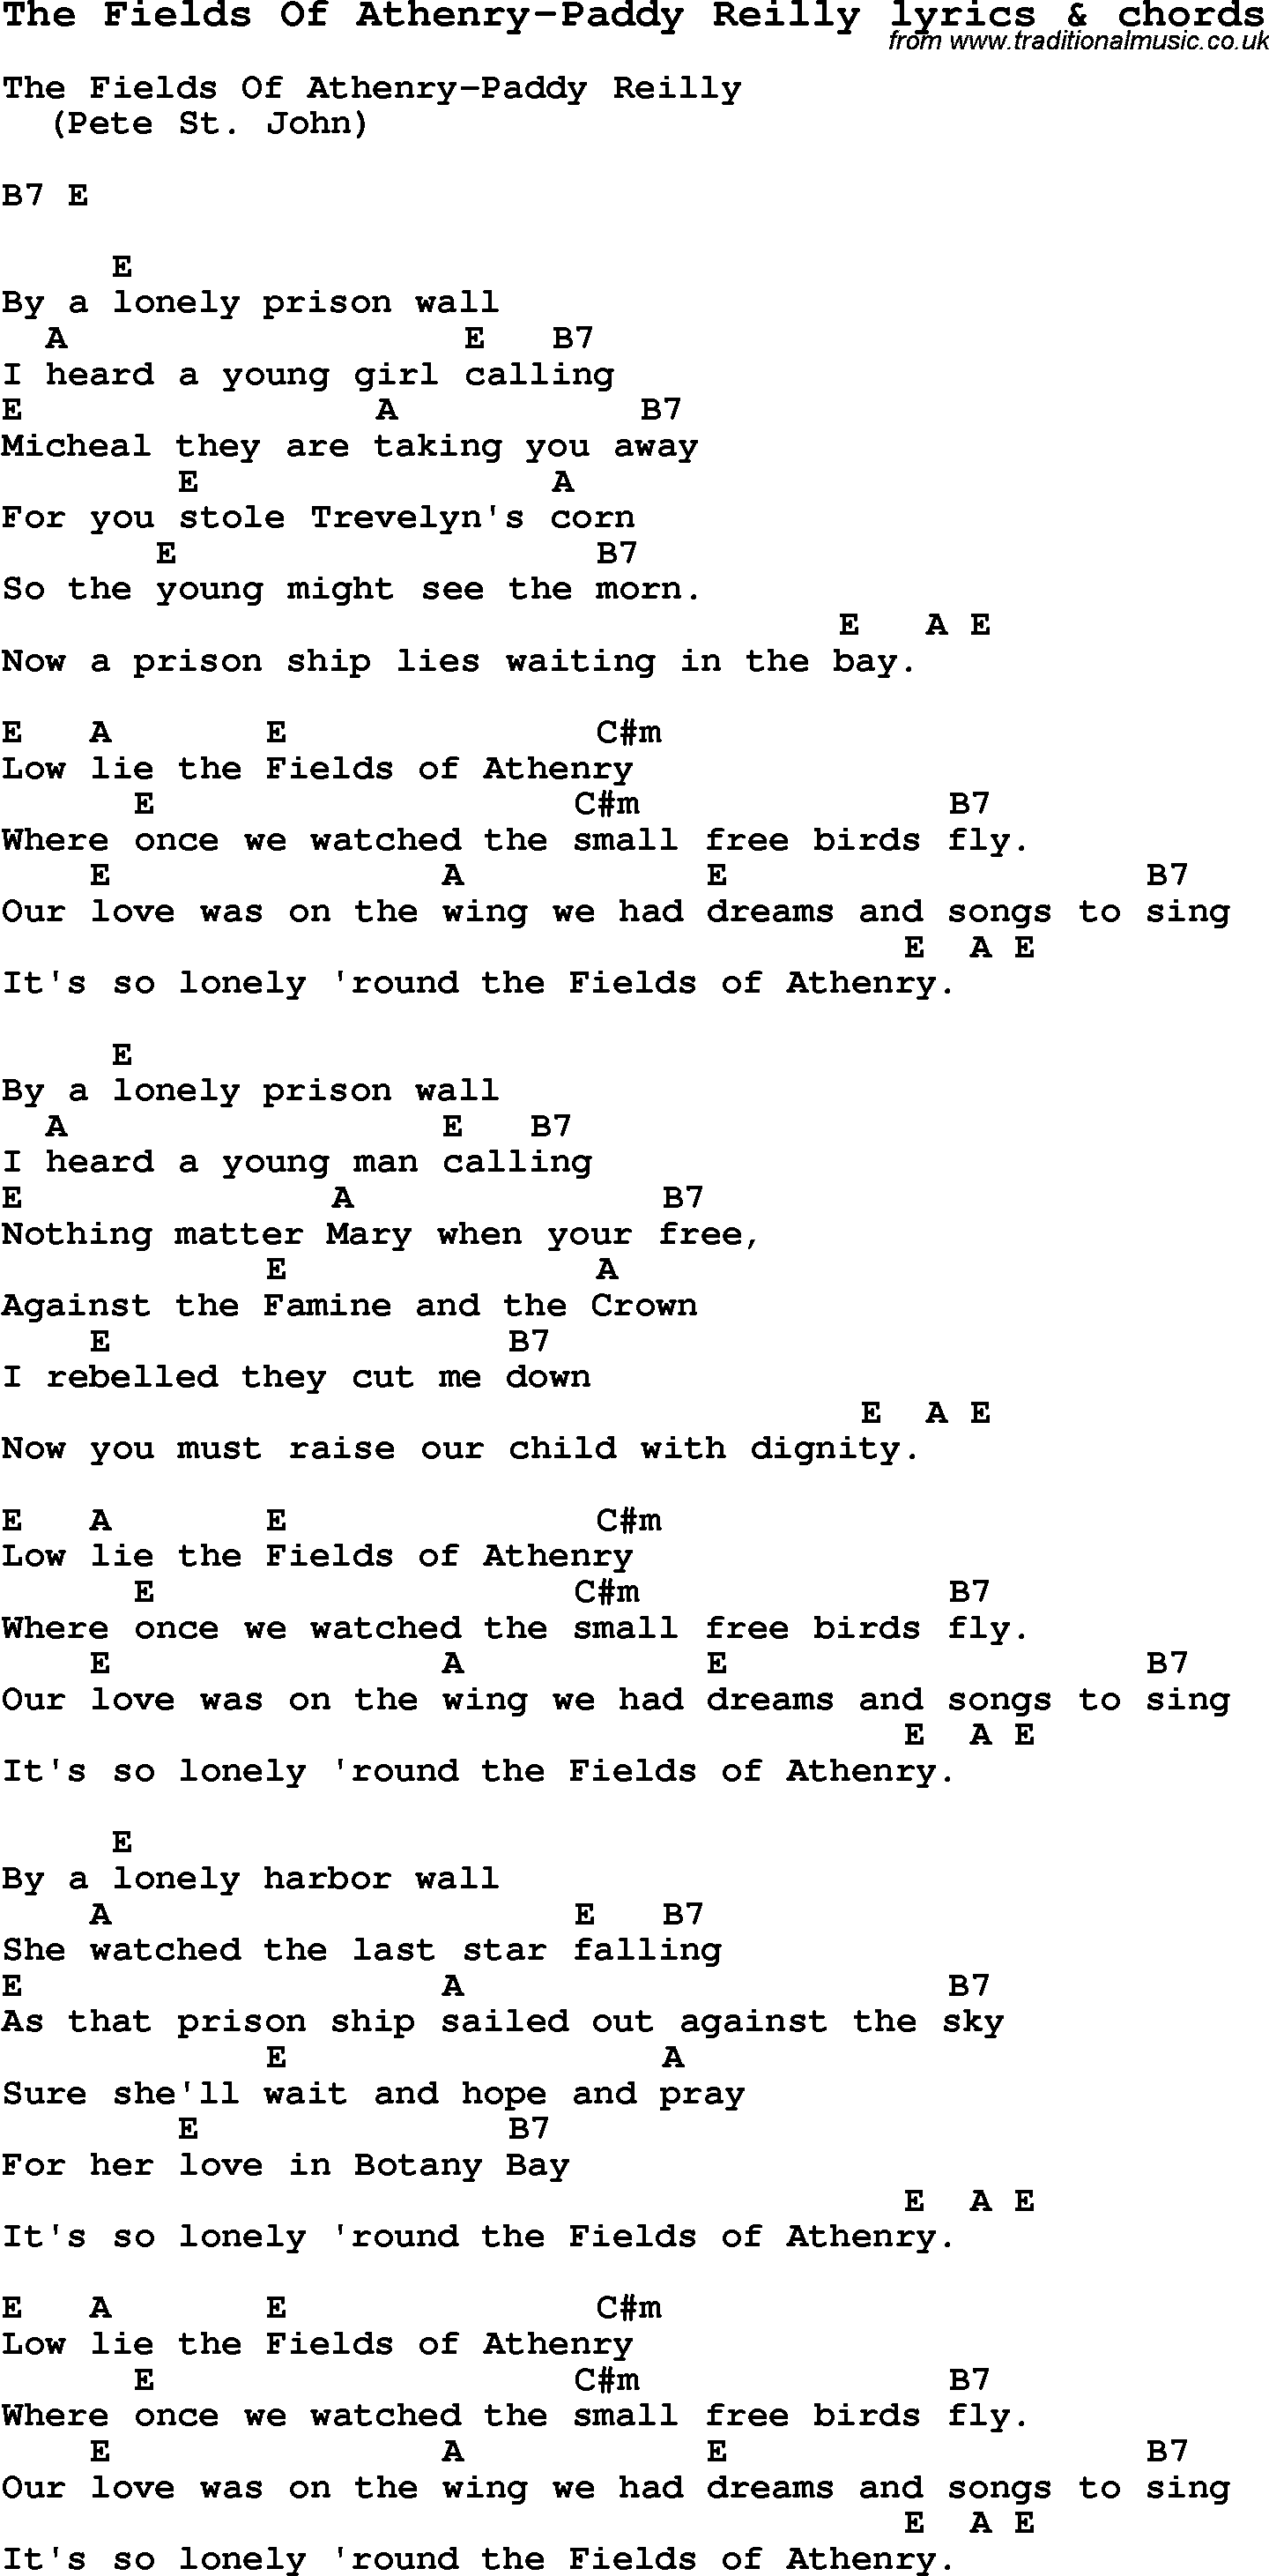 Love Song Lyrics for: The Fields Of Athenry-Paddy Reilly with chords for Ukulele, Guitar Banjo etc.